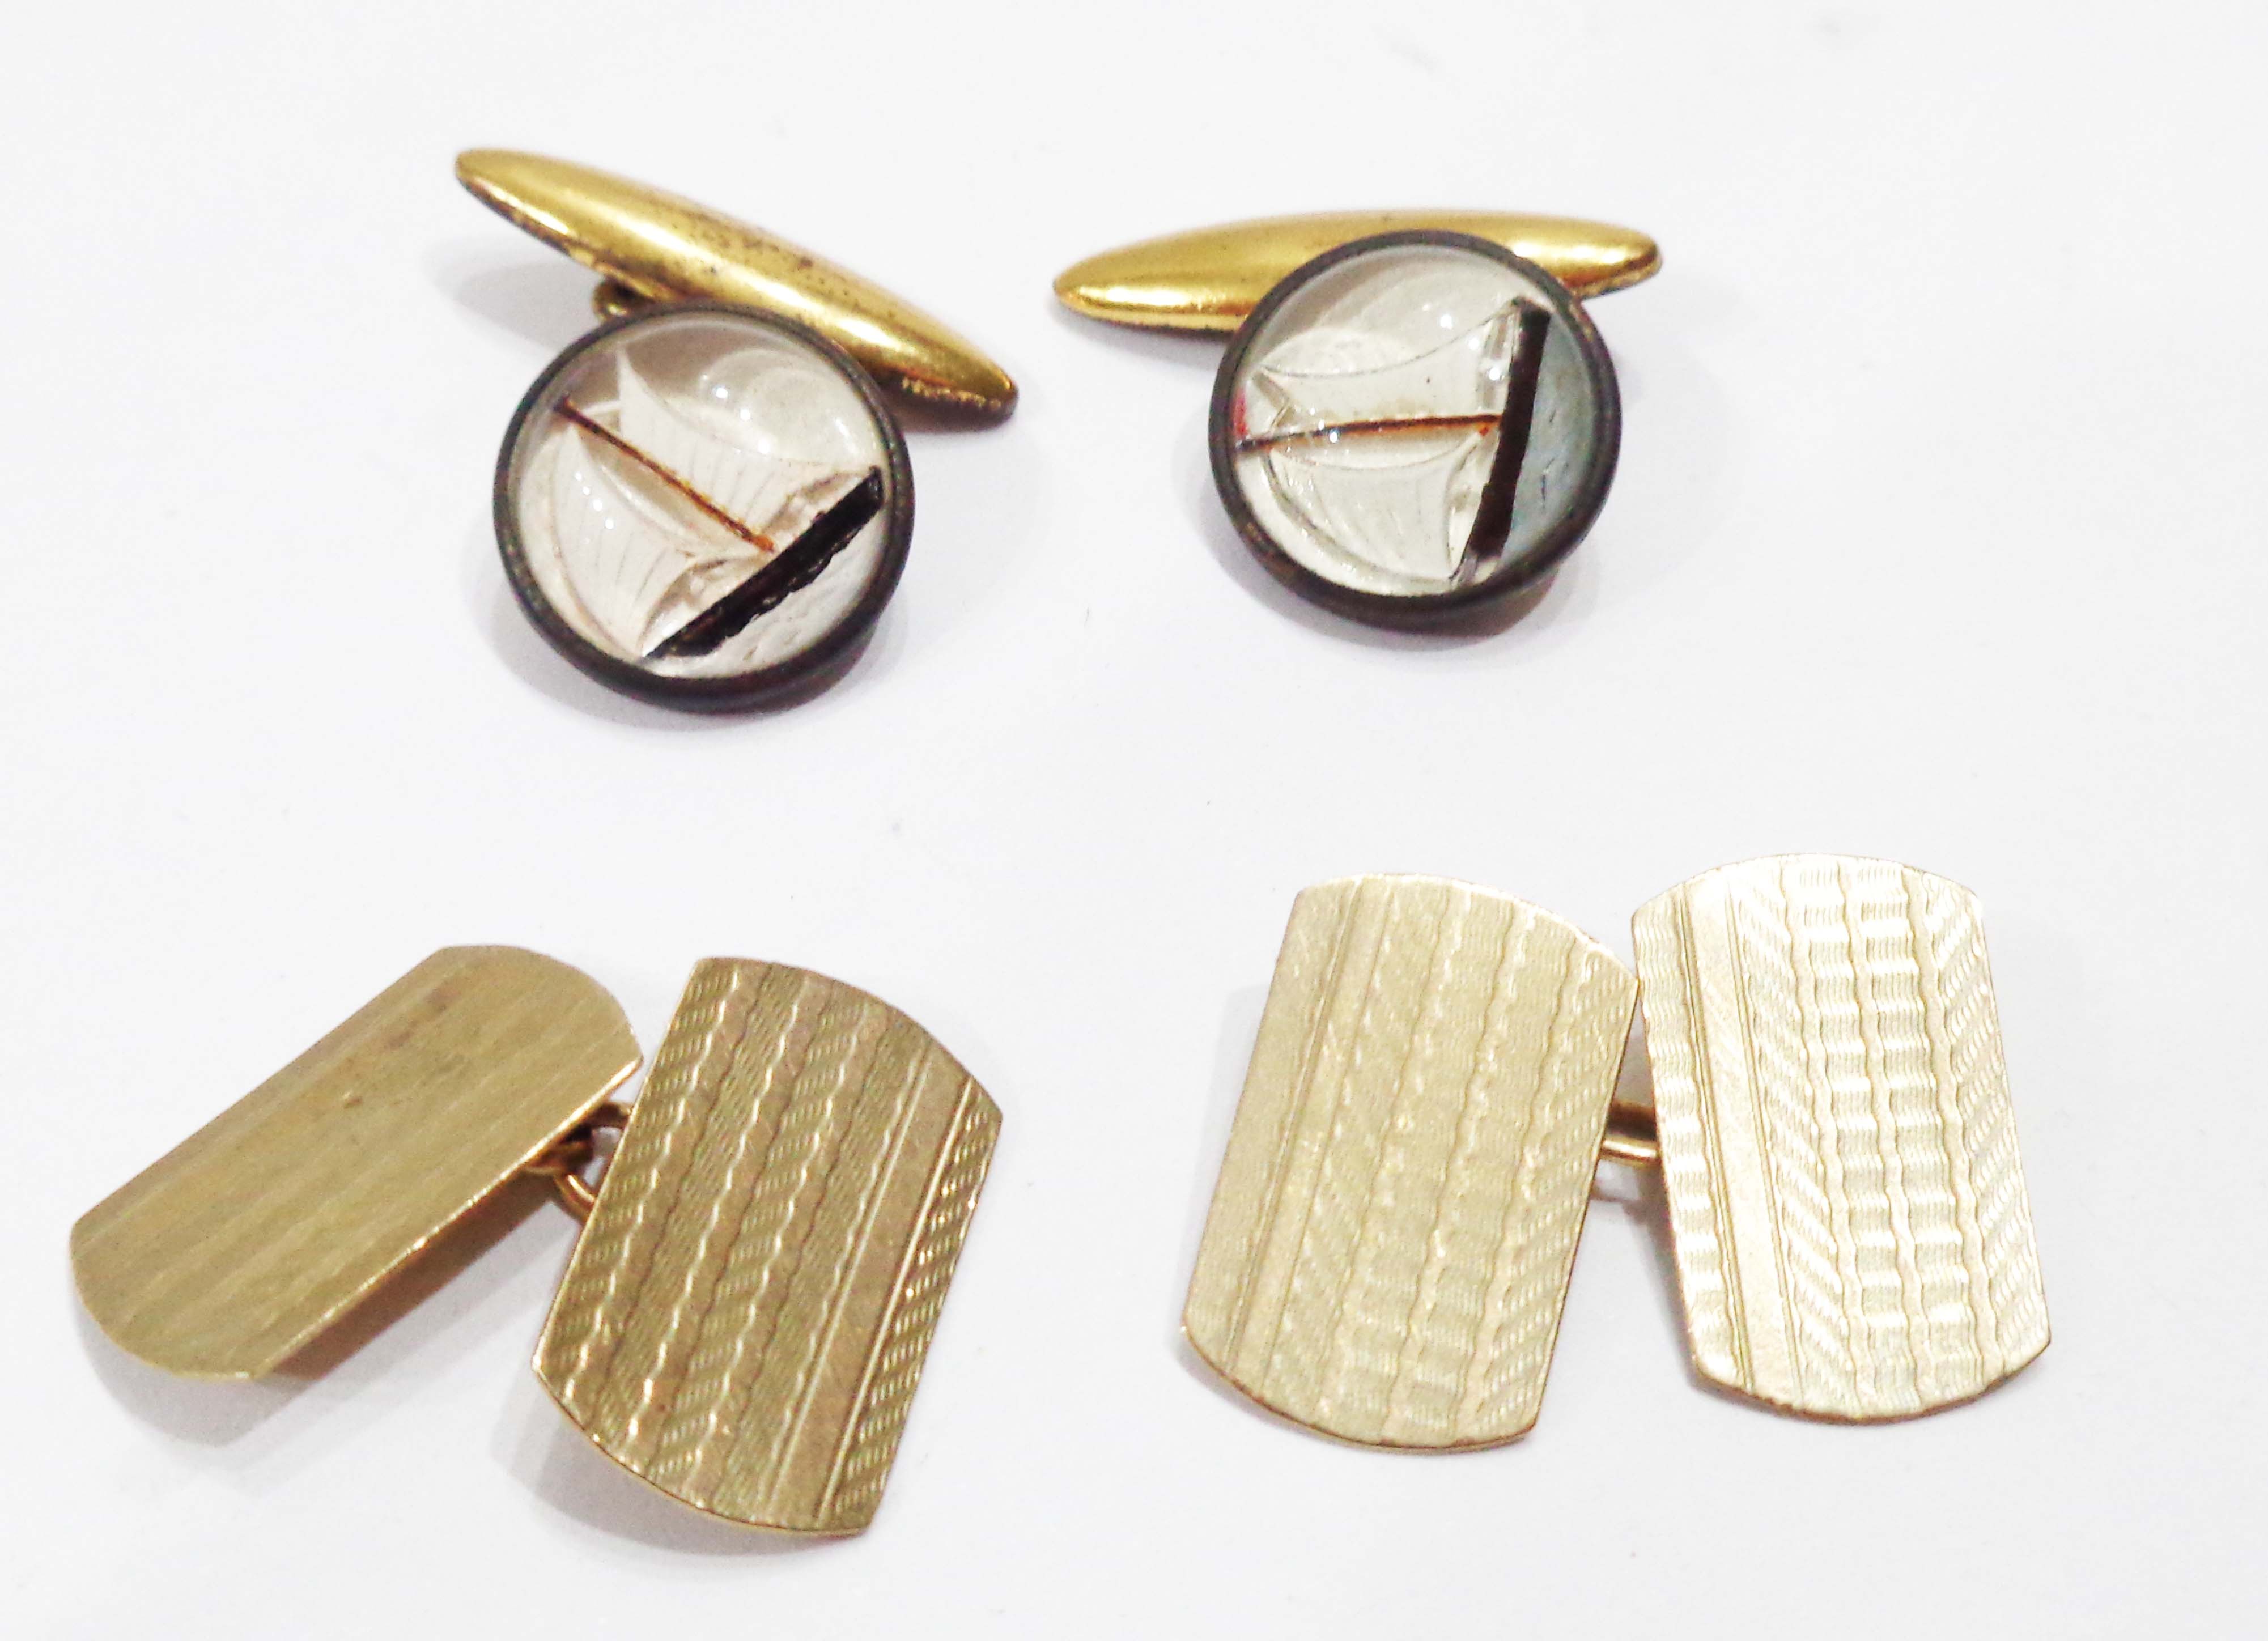 A pair of 9ct. gold panel cufflinks - sold with a pair of Essex crystal cufflinks with sailing